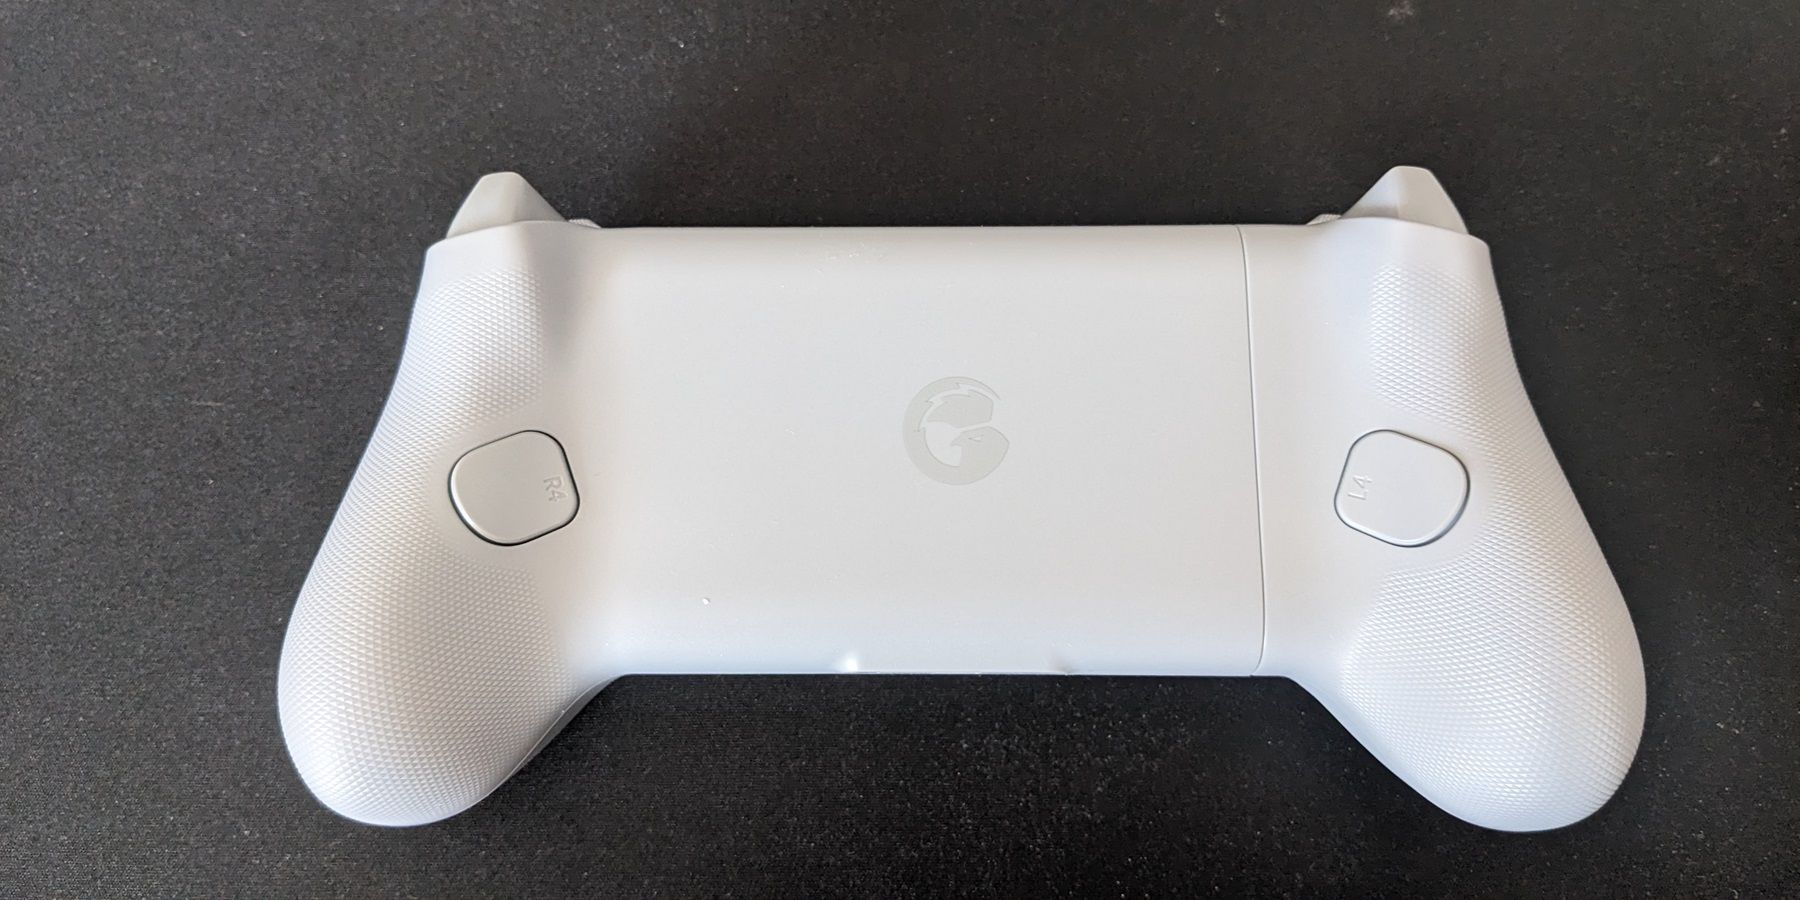 The GameSir G8 Galileo is great for PS Remote Play - GadgetMatch